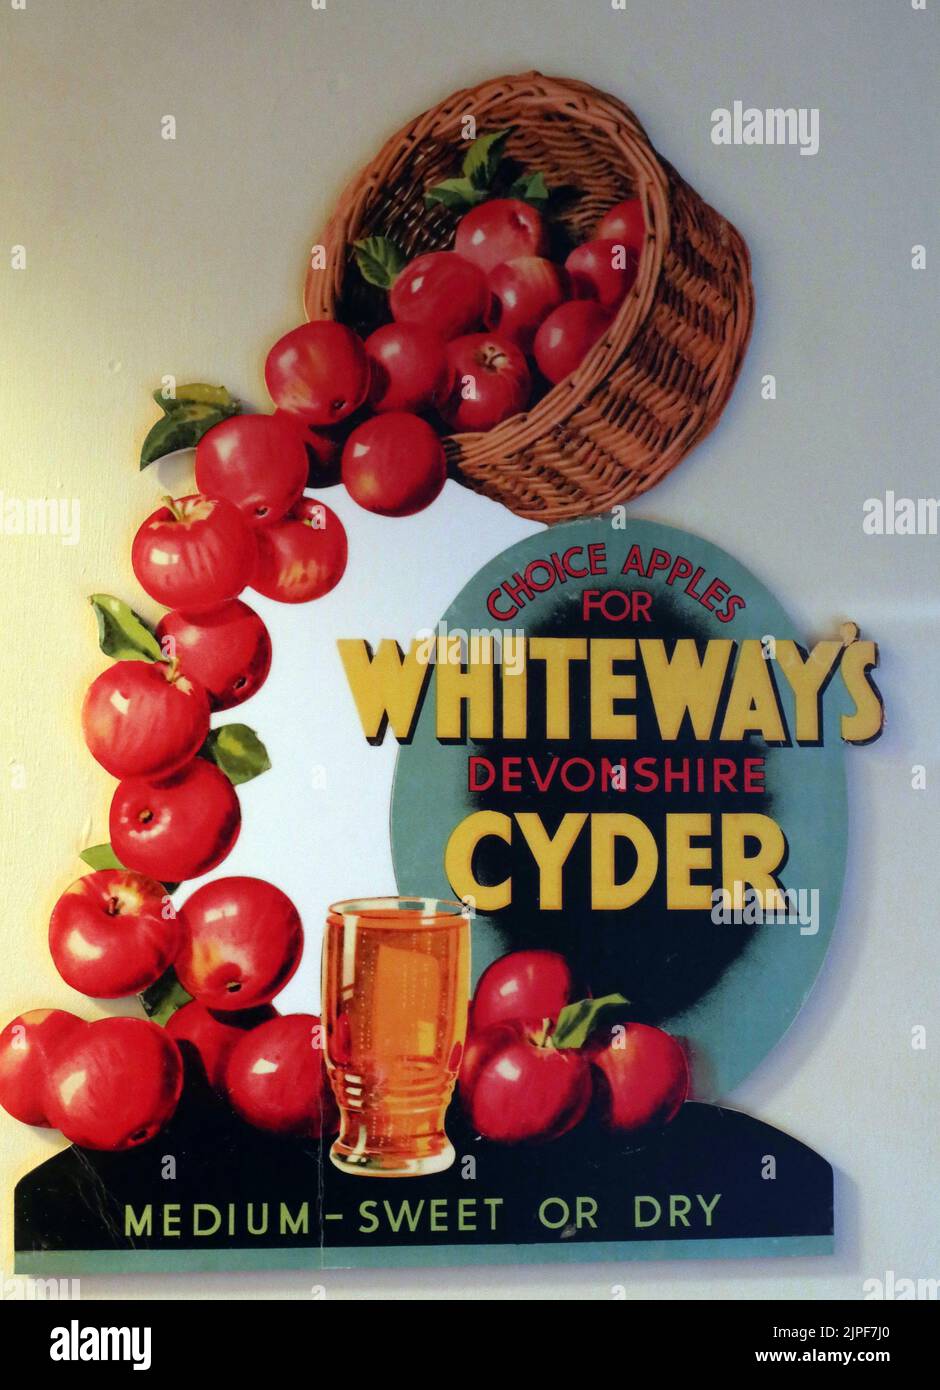 1950s Poster advert for Whiteways Devon Cyder 'No More Than Ordinary Ciders' - Choice Apples - Medium Sweet or Dry Stock Photo